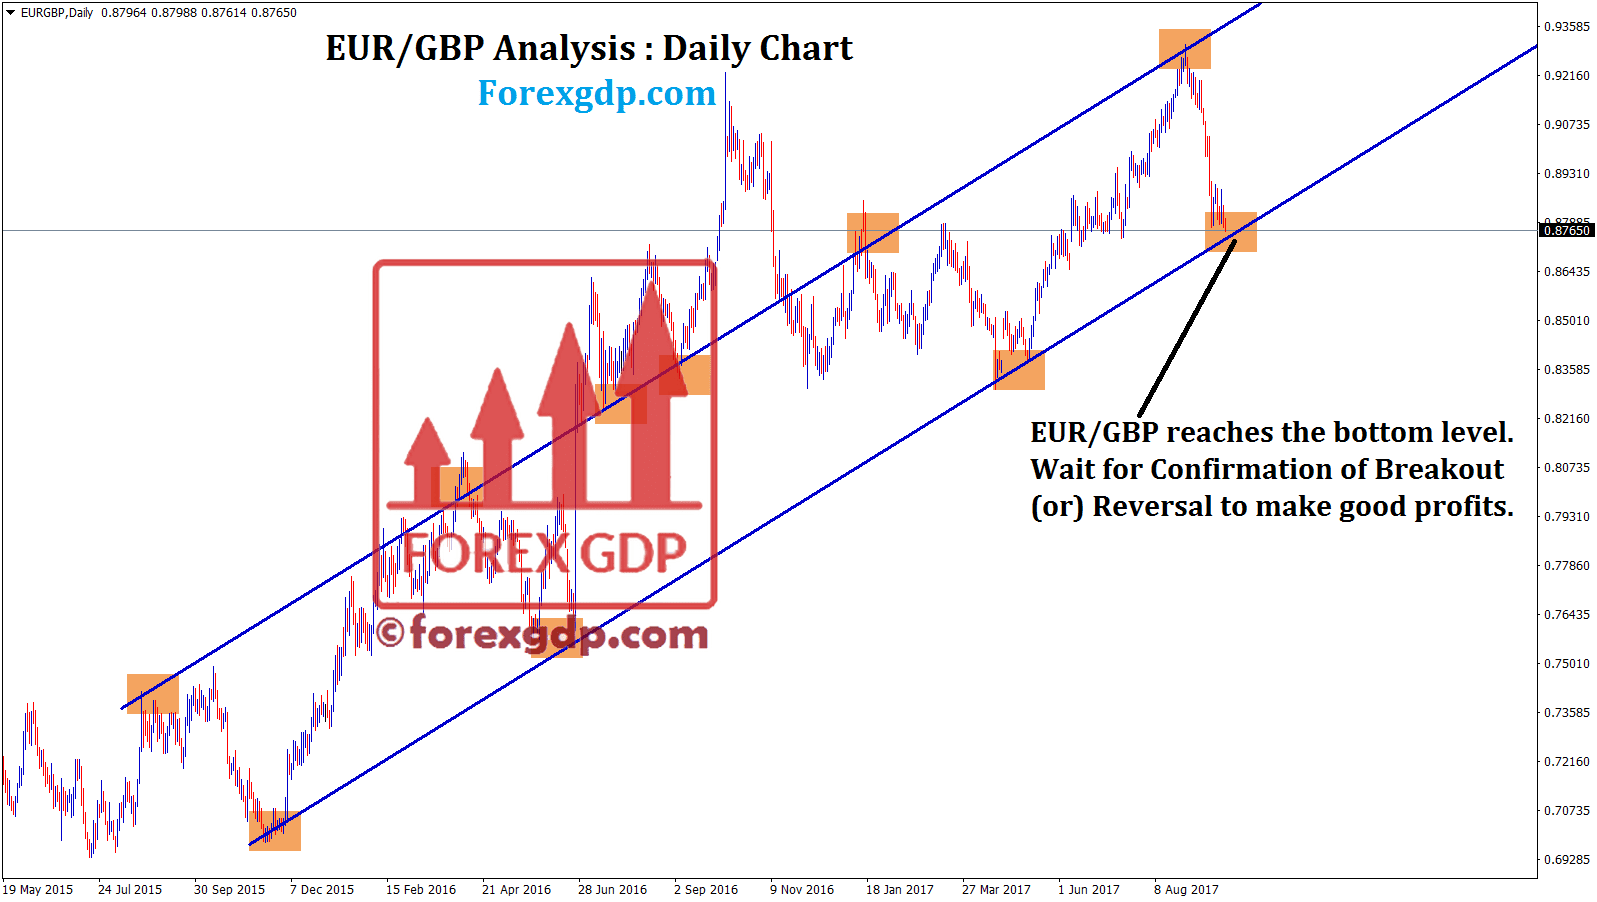 eur gbp analysis for up trend market